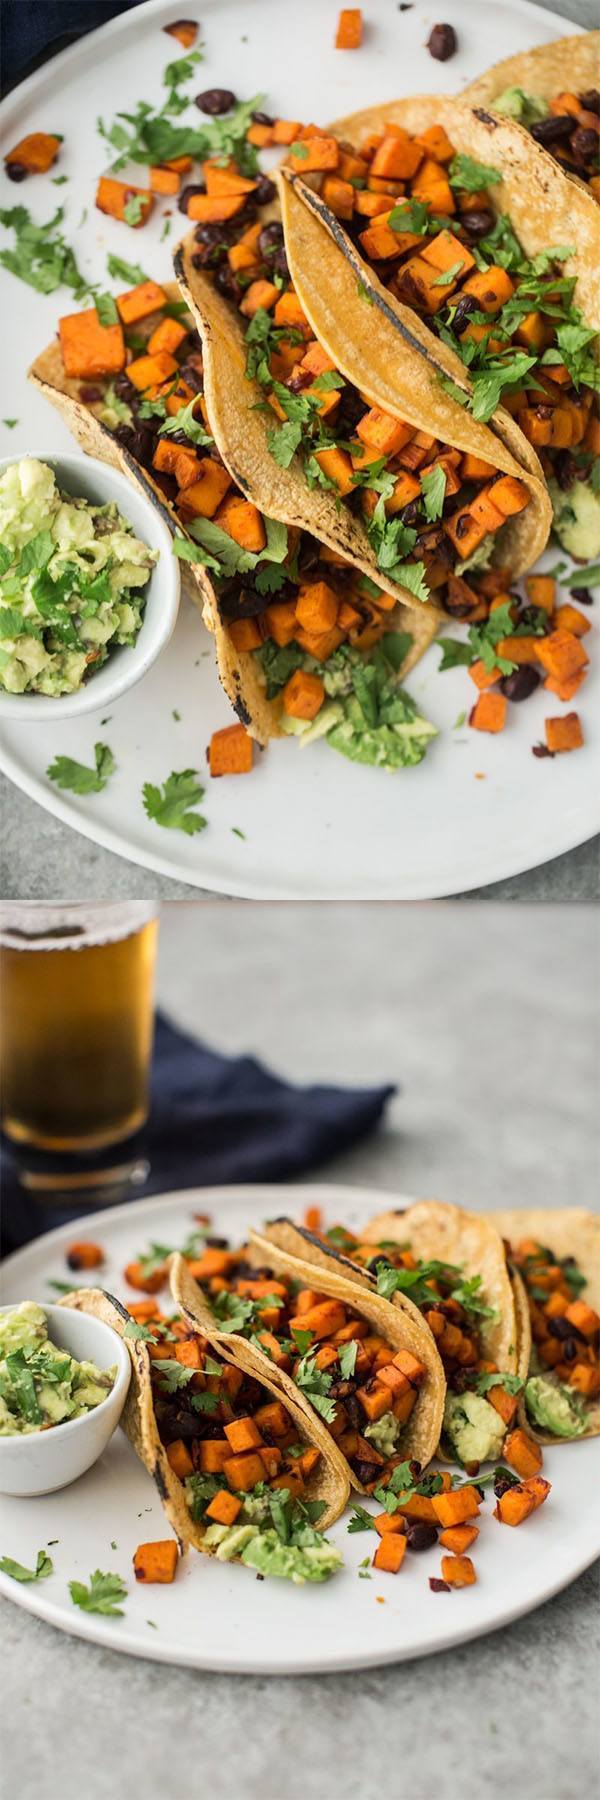 Chipotle Sweet Potato Tacos with Black Beans and Guacamole